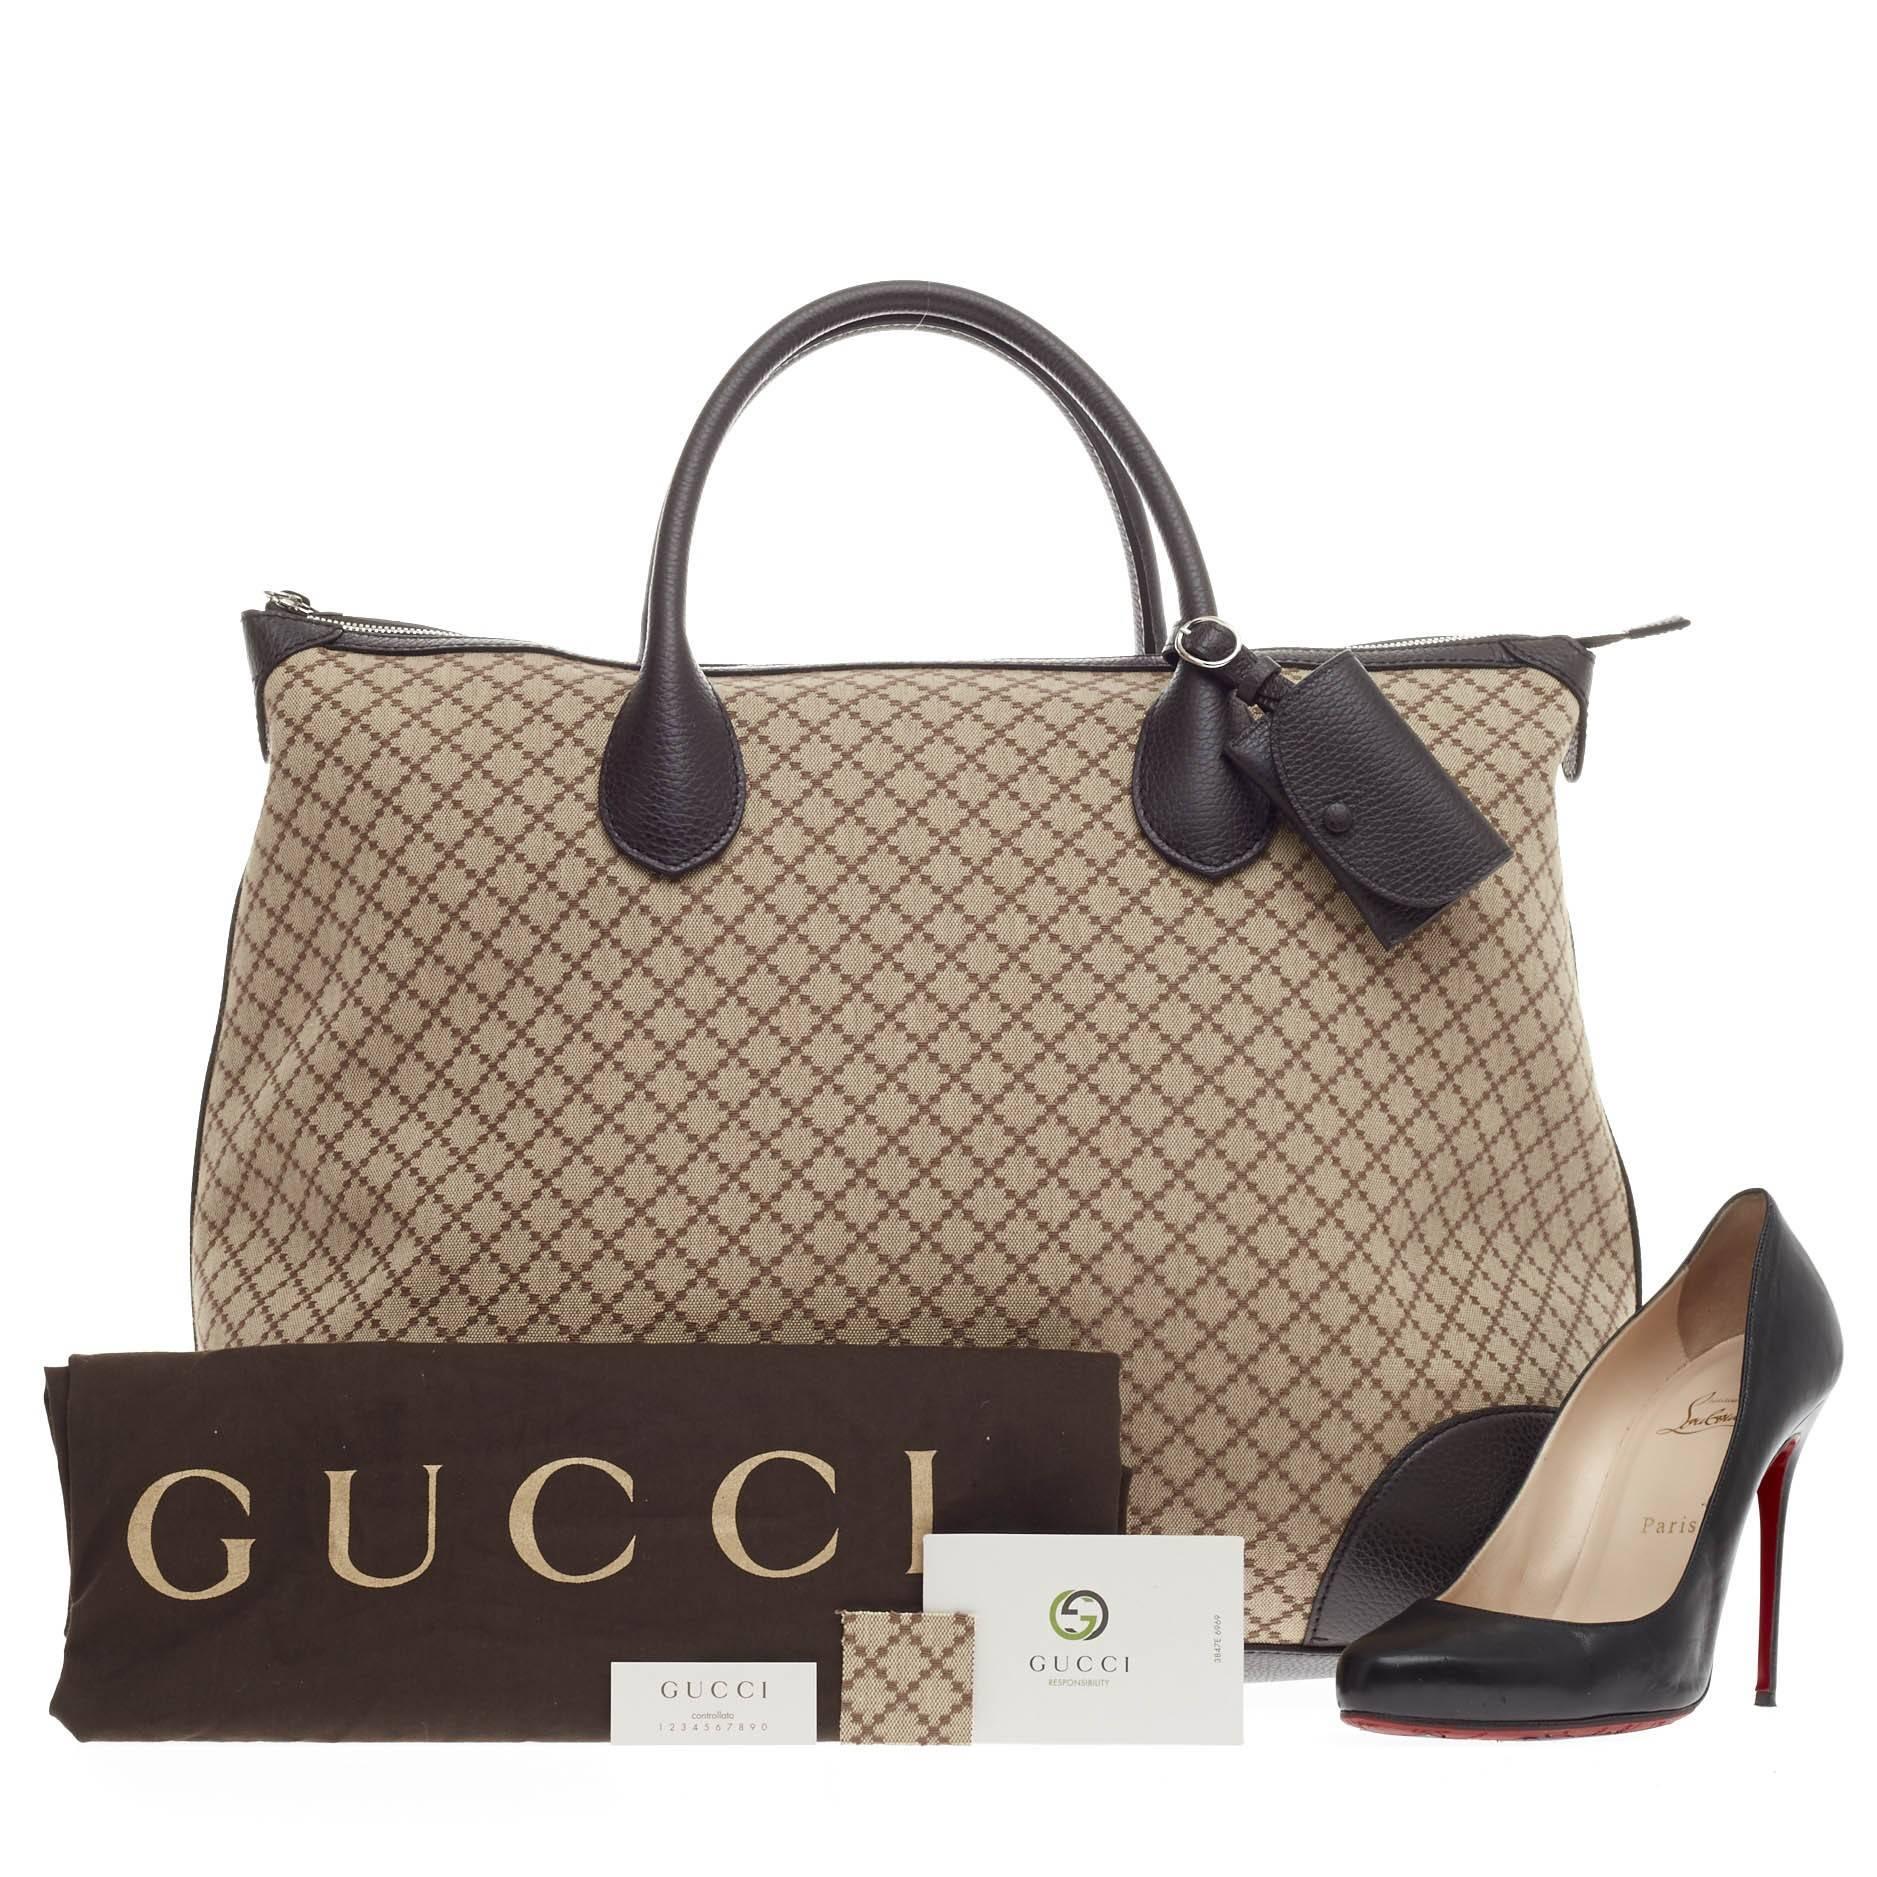 This authentic Gucci Weekender Zip Tote Diamante Canvas Large is perfect for a luxurious weekend getaway. Crafted in Gucci’s diamante canvas in brown with dark brown leather trims, this oversized tote features dual-rolled leather handles, protective